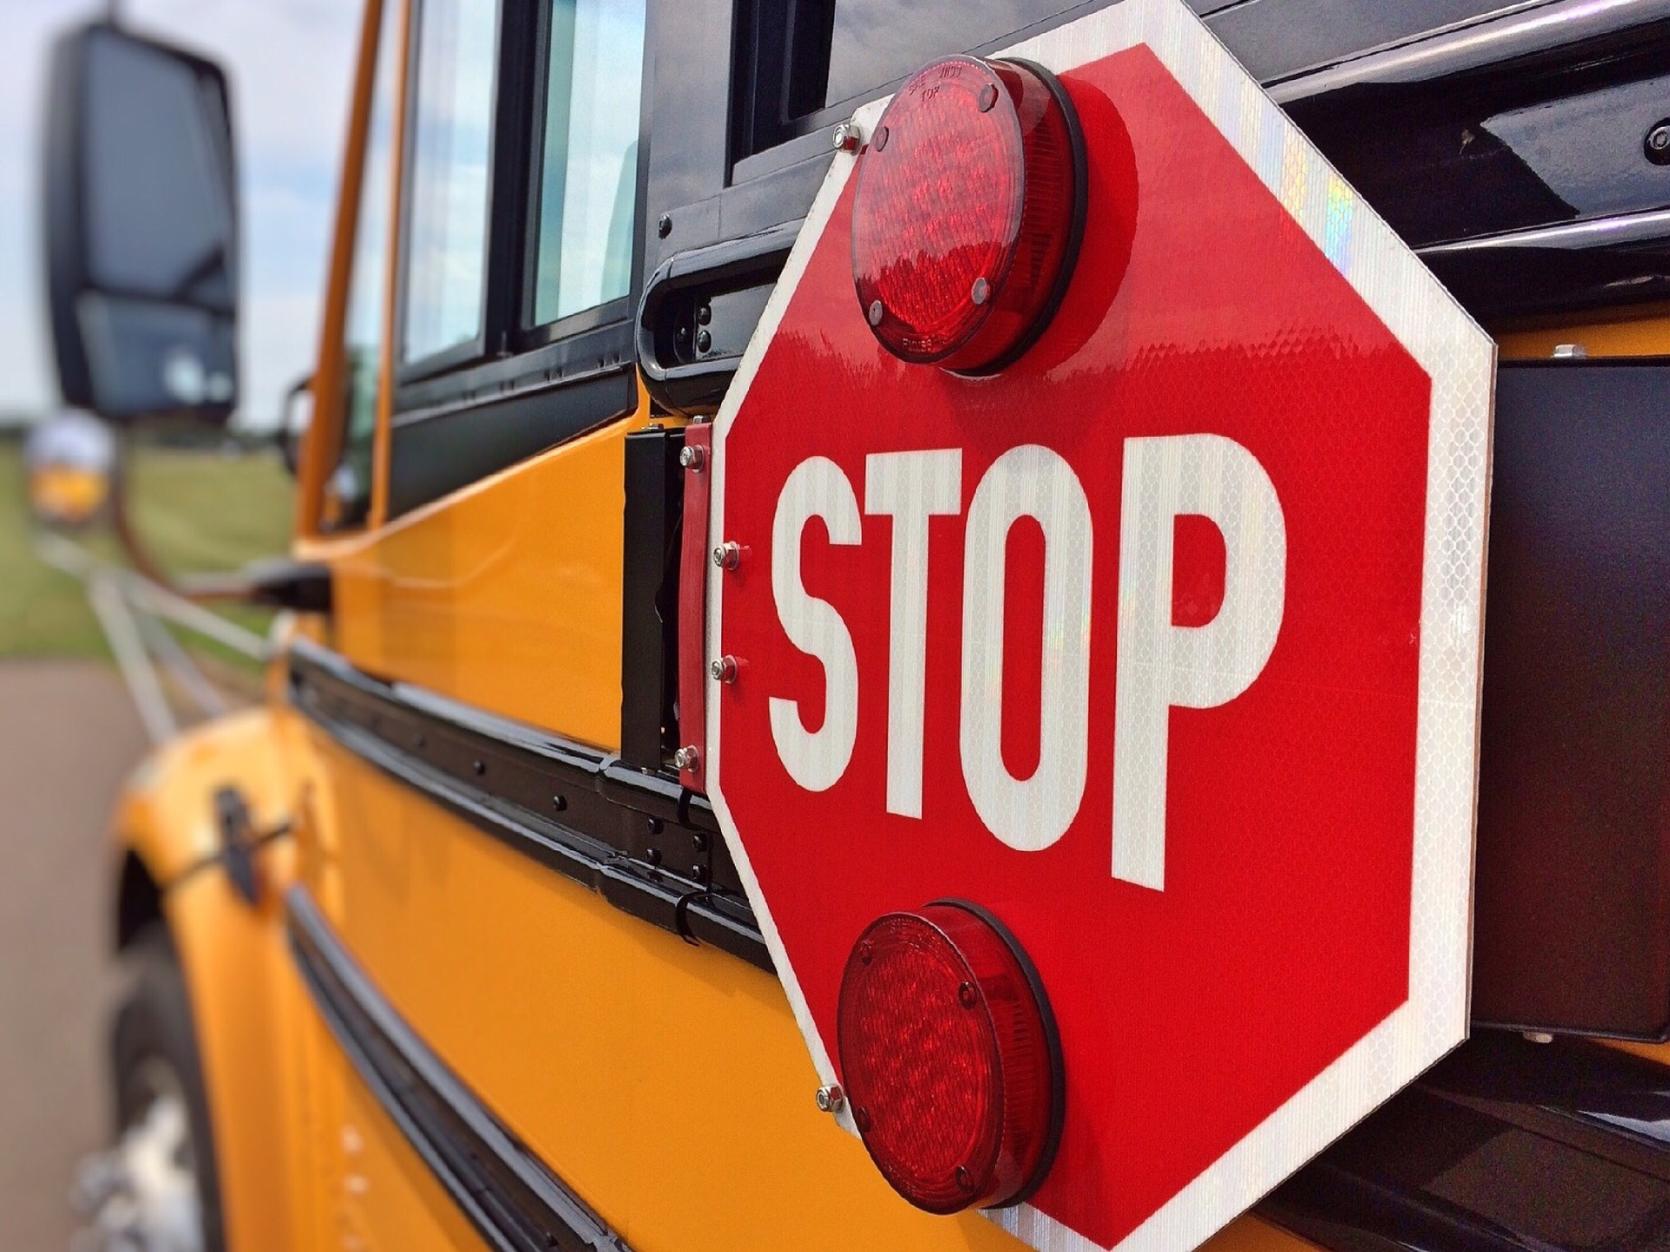 Stop sign on the side of a school bus.